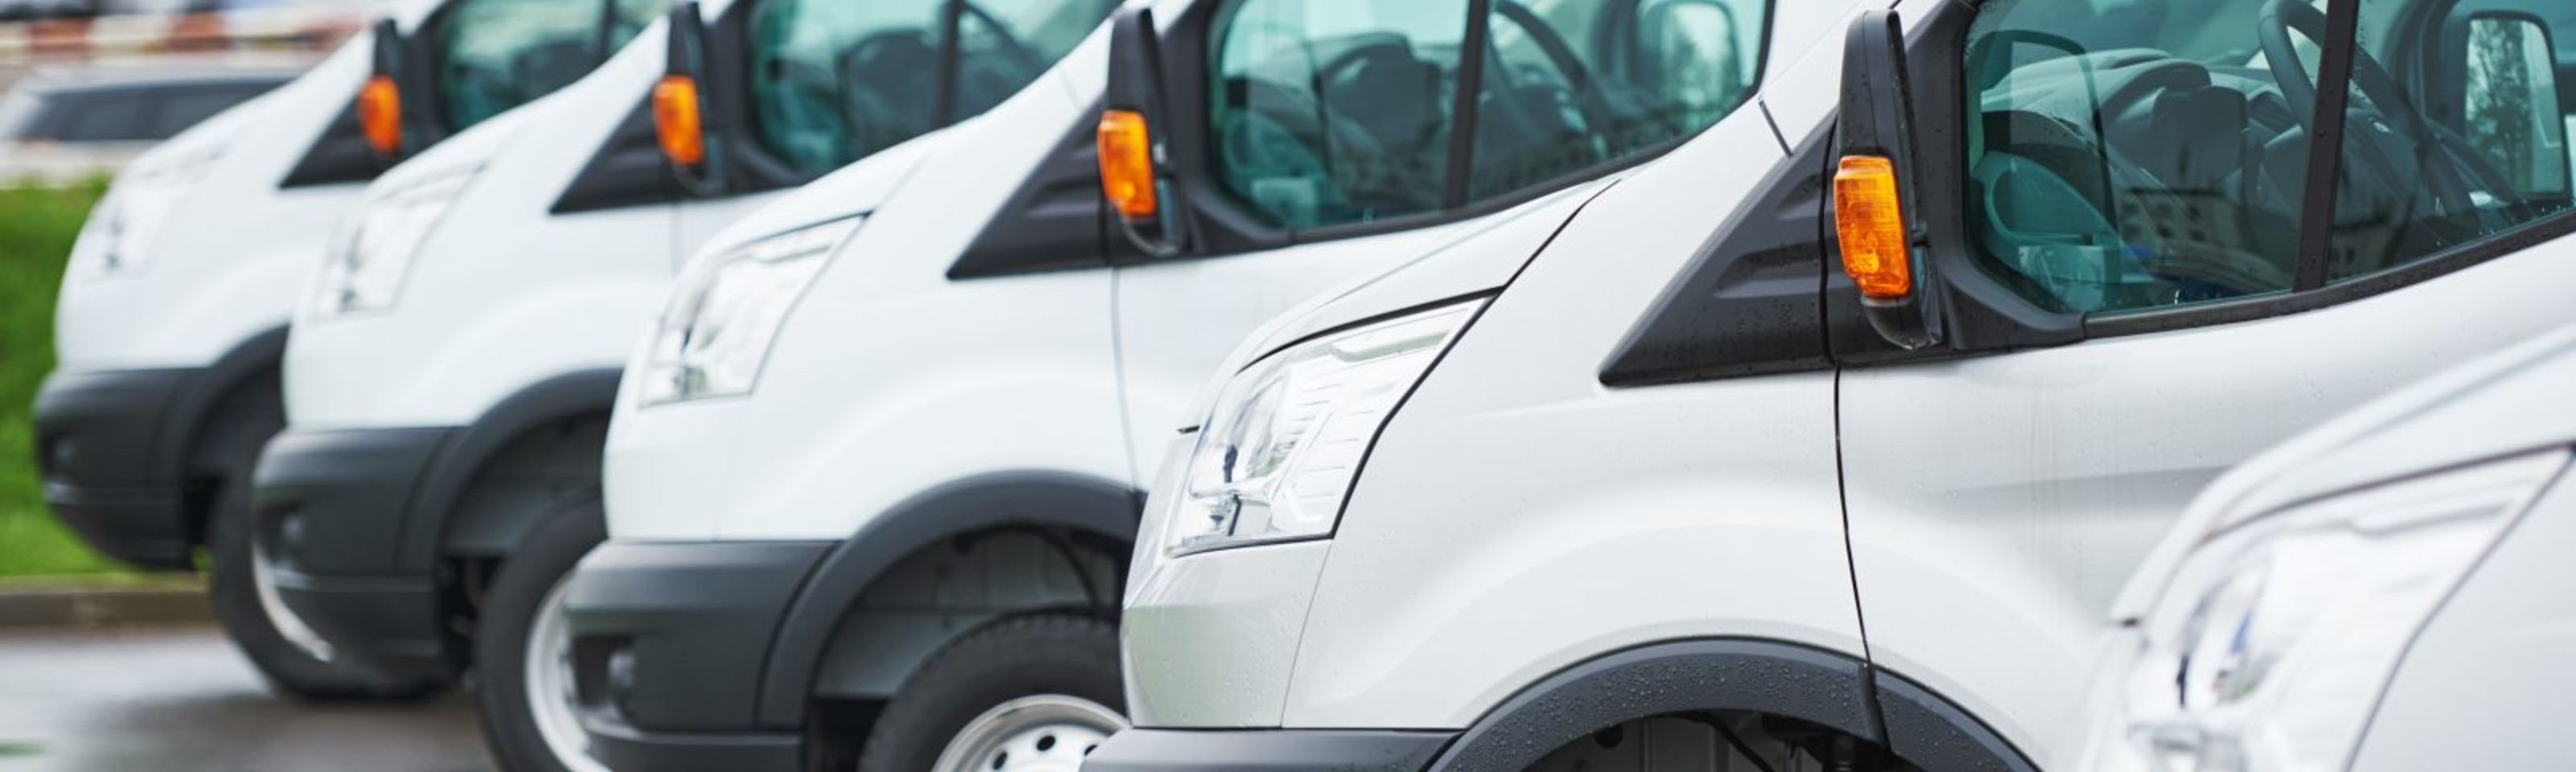 How flexi hire can help you grow your business fleet in 2021